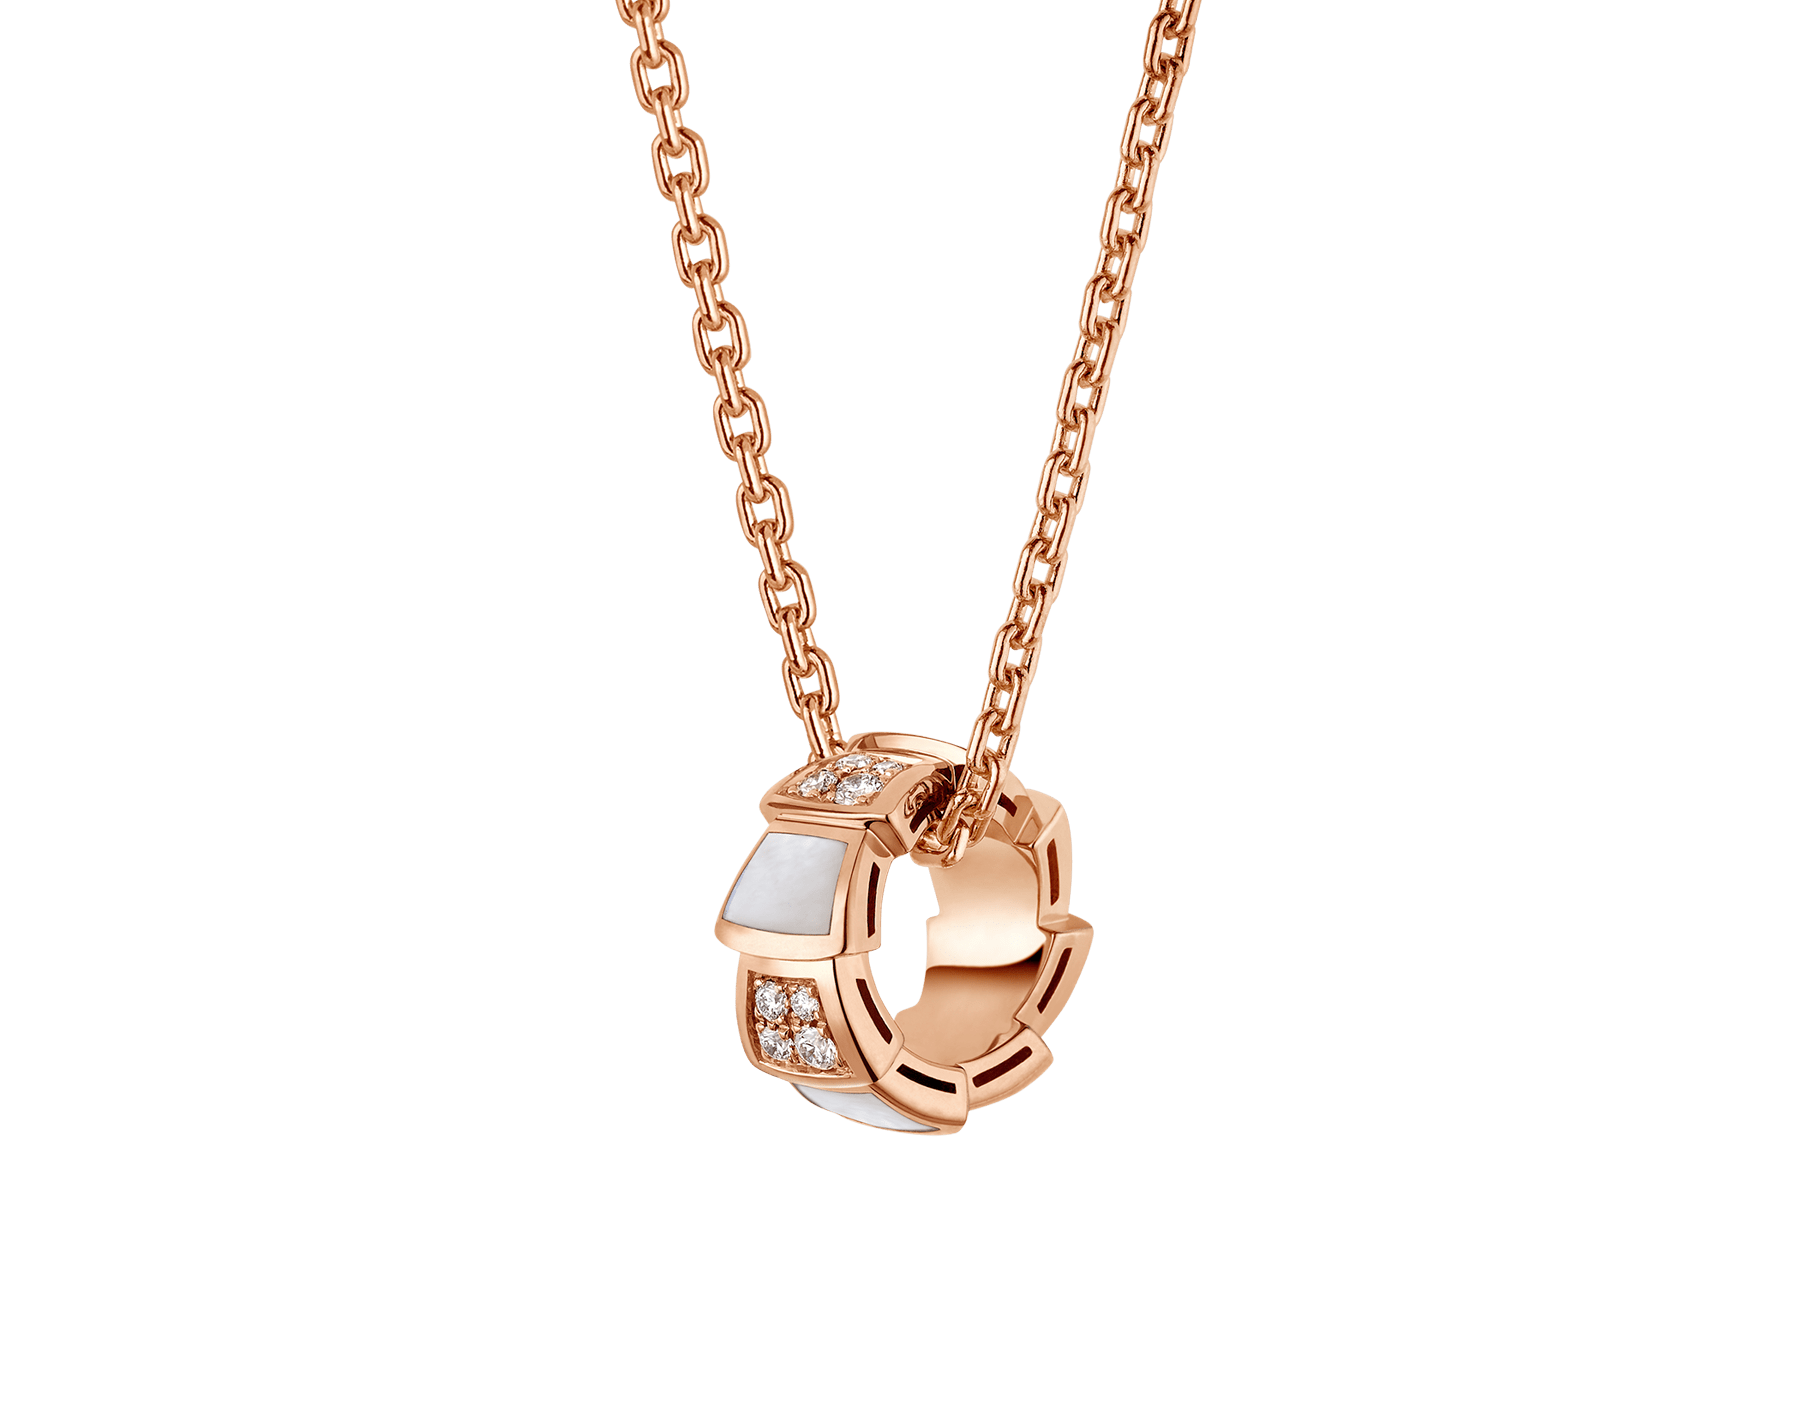 Wholesale Custom design jewelry 18 kt rose gold necklace set with mother of pearl elements and pavé diamonds on the pendant OEM/ODM Jewelry